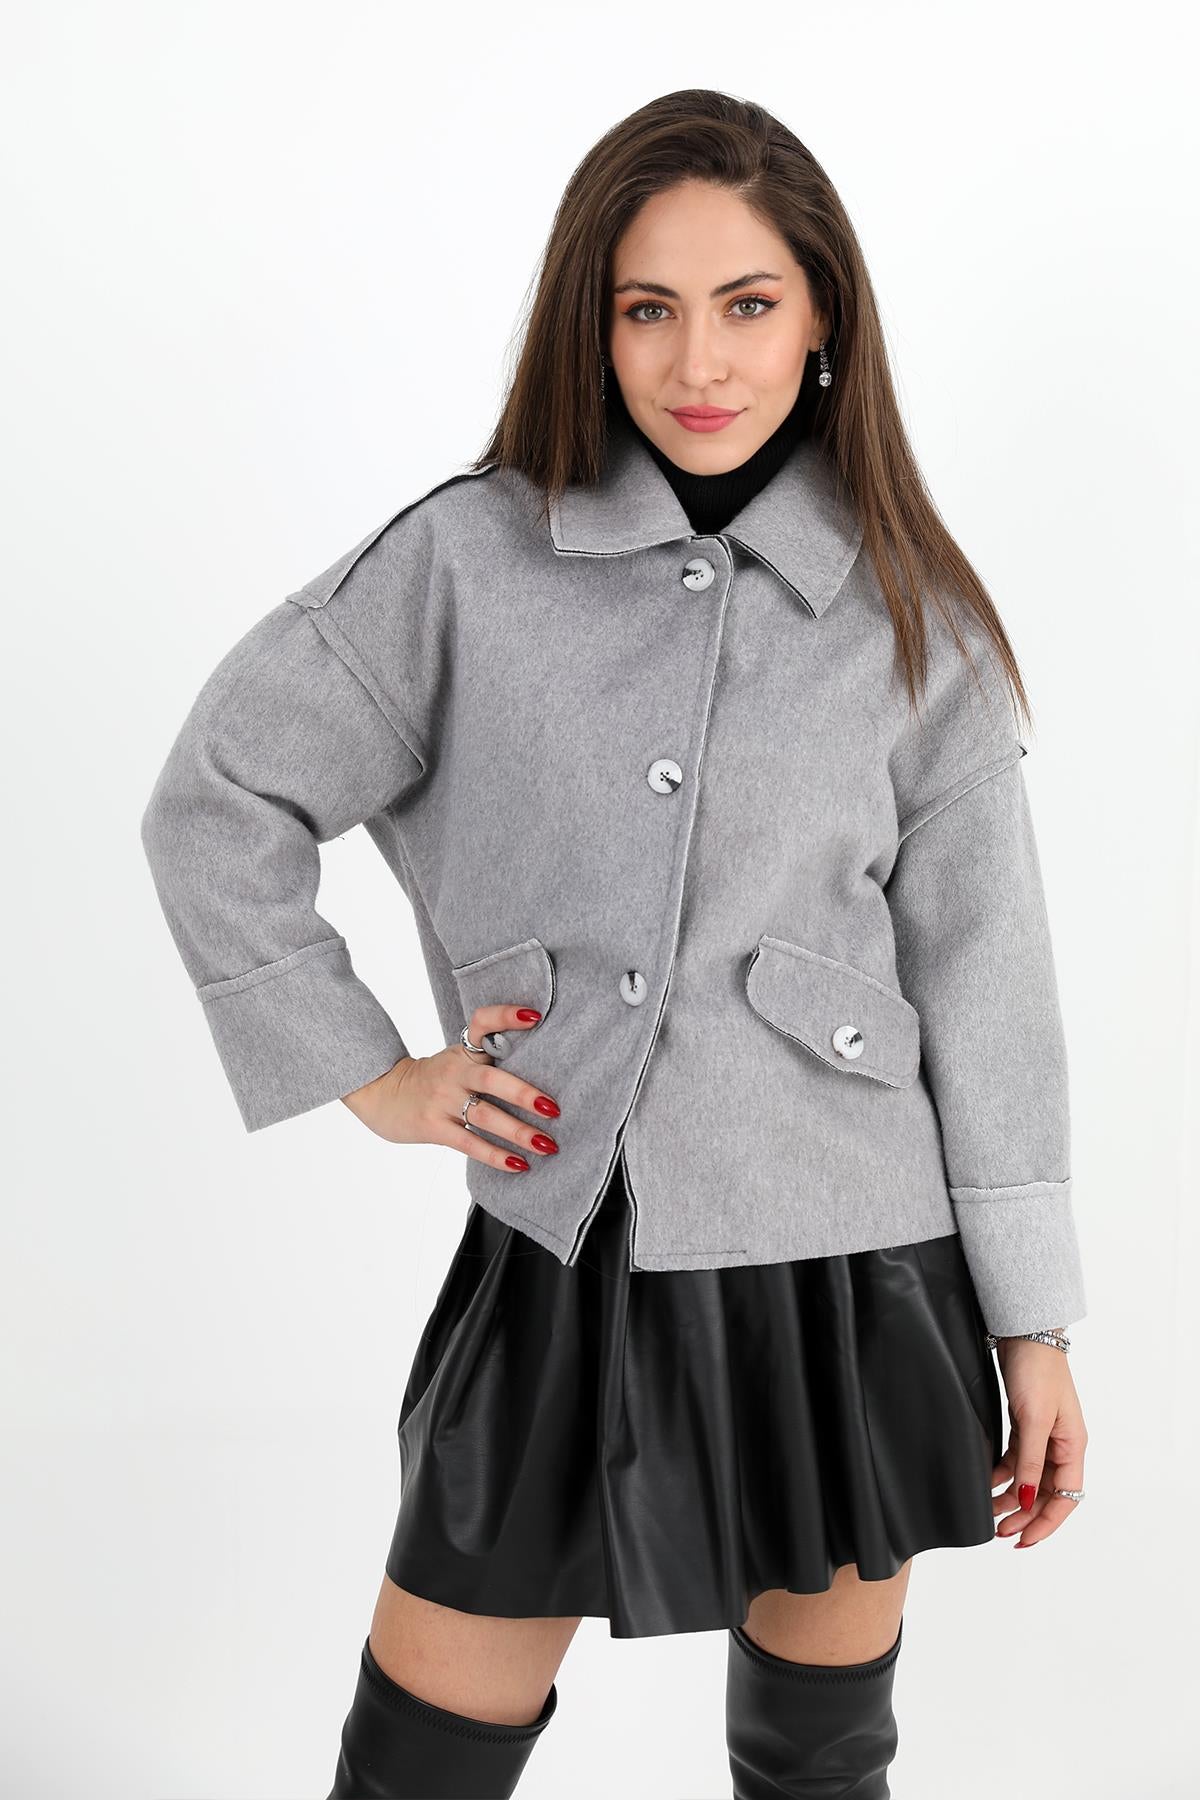 Women's Coat with Pocket Flap Button-Up Short - Gray - STREETMODE ™